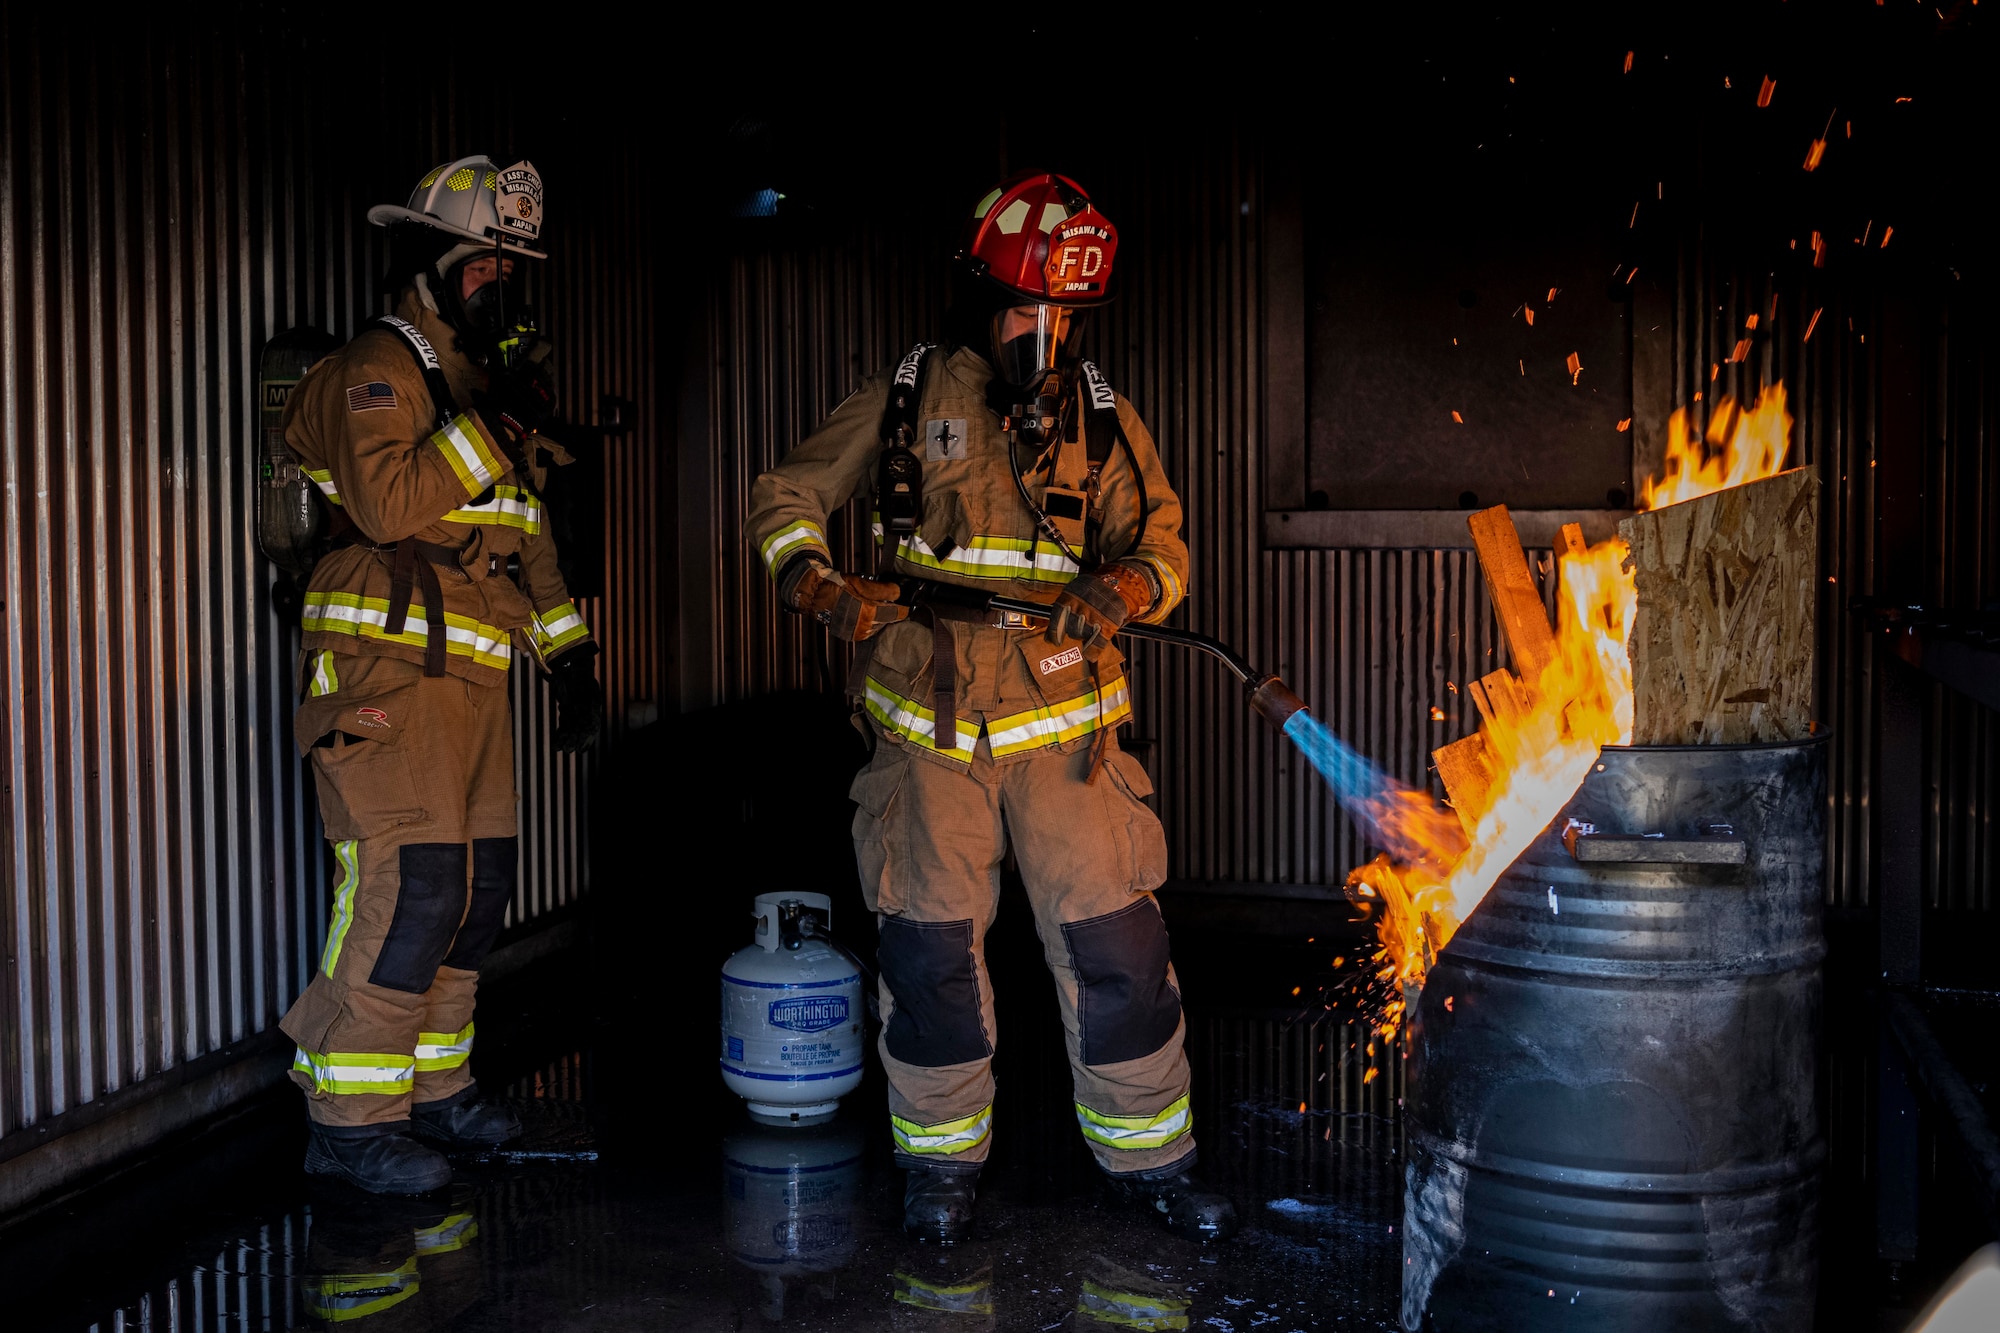 Firefighters start a fire for a training.